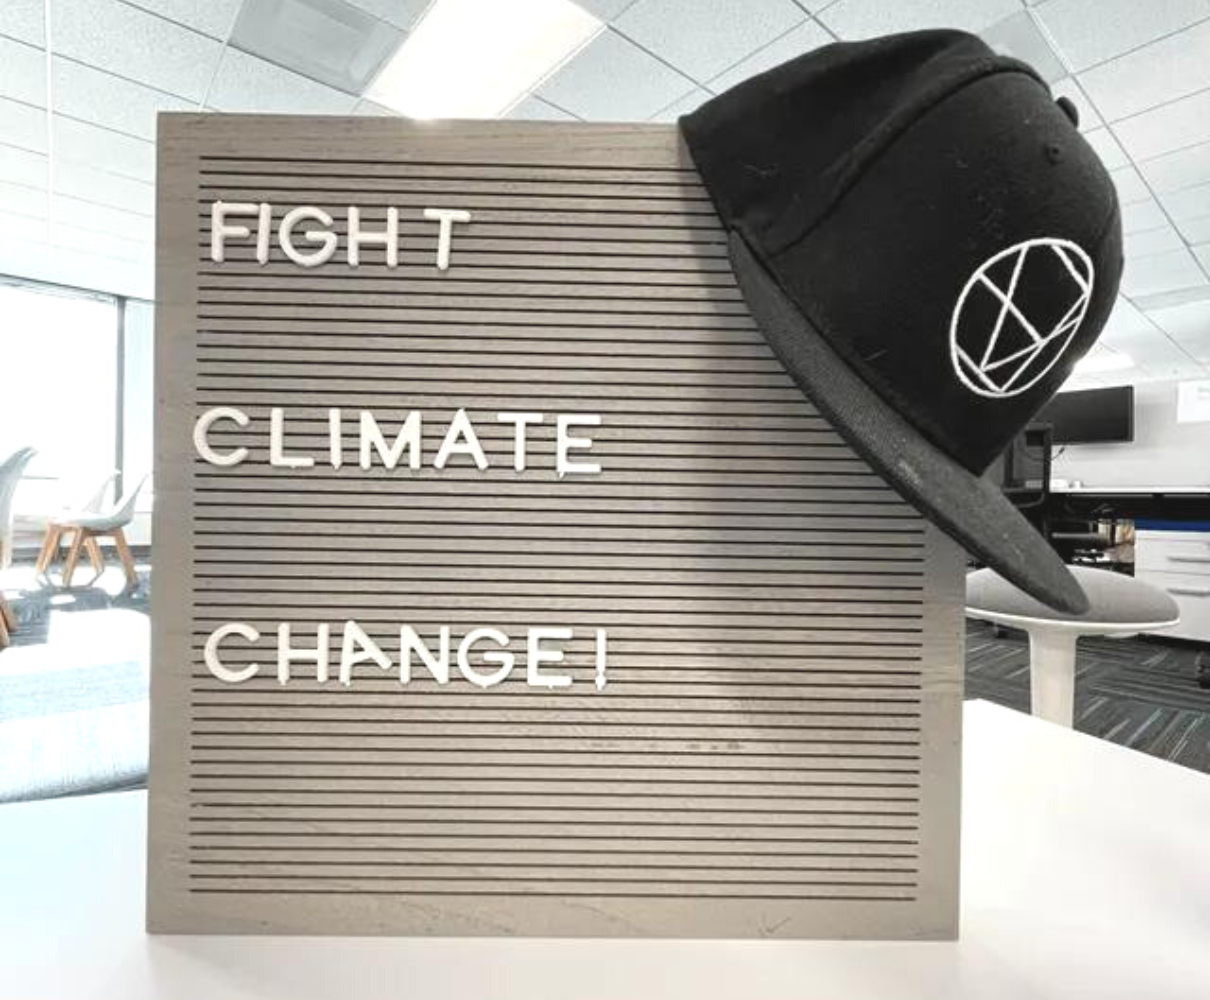 Fight Climate Change